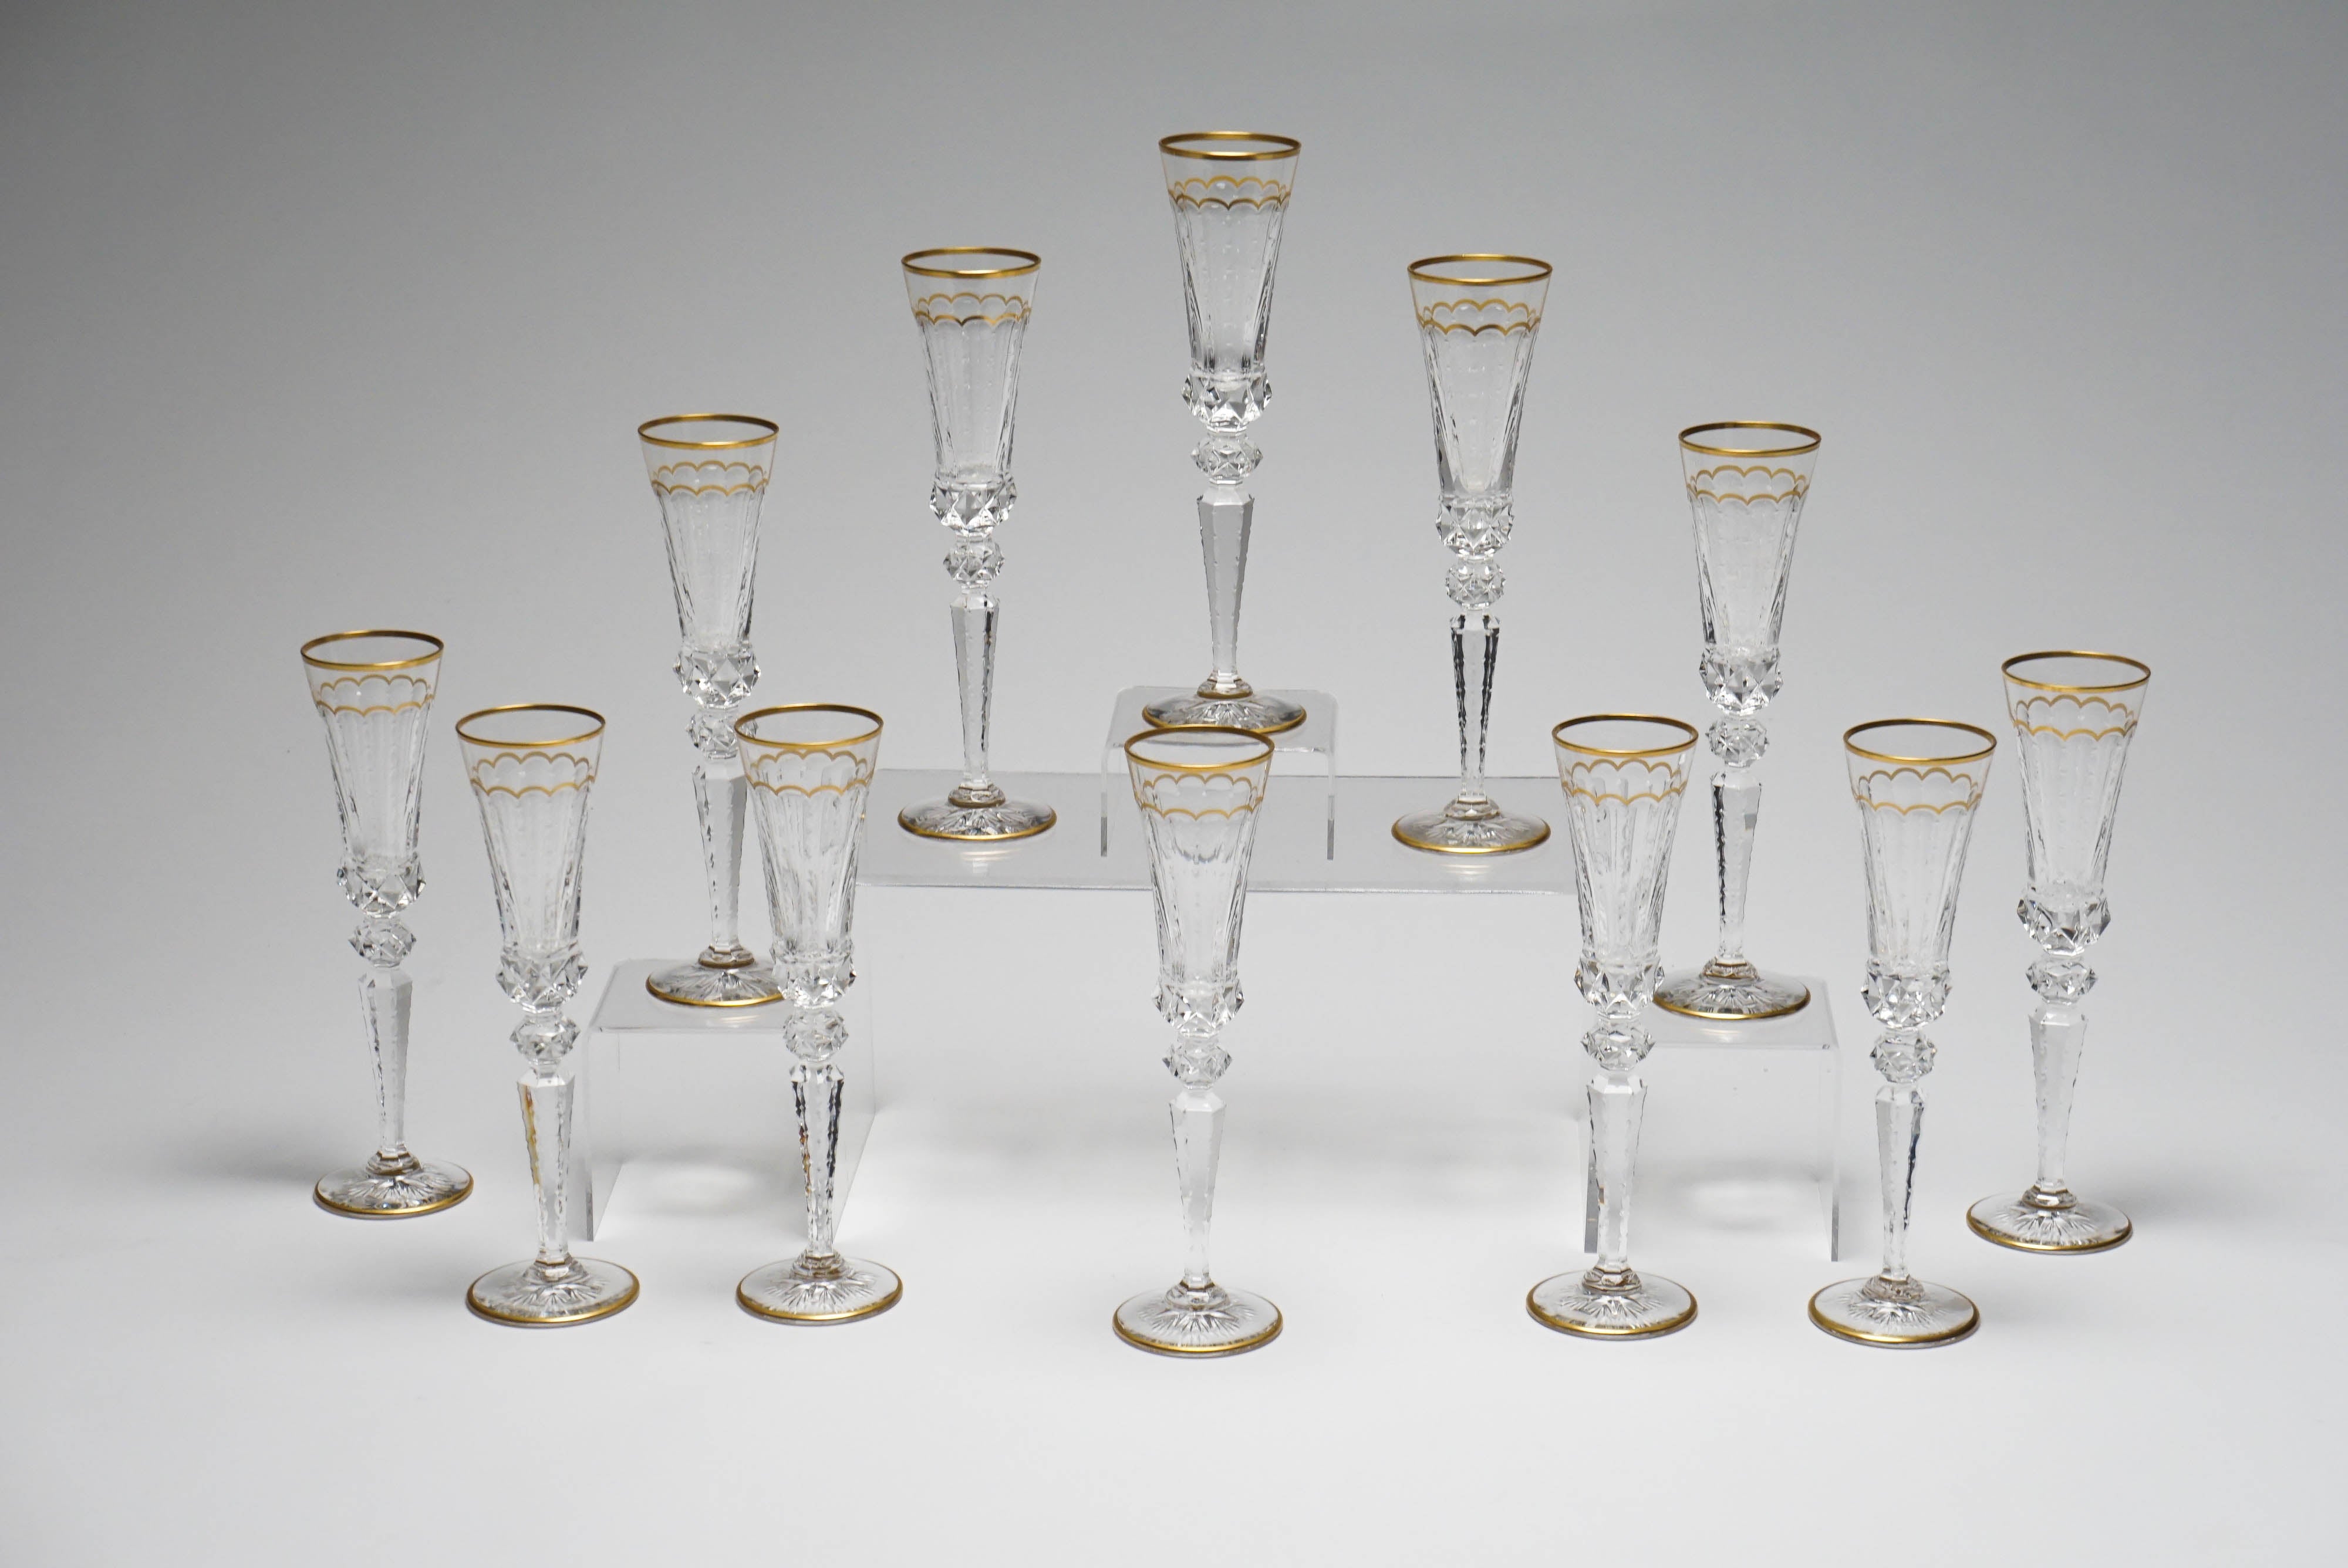 These are perfect for ushering in the holidays- a set of 12 mint condition handblown crystal champagne flutes in the ever glamorous 